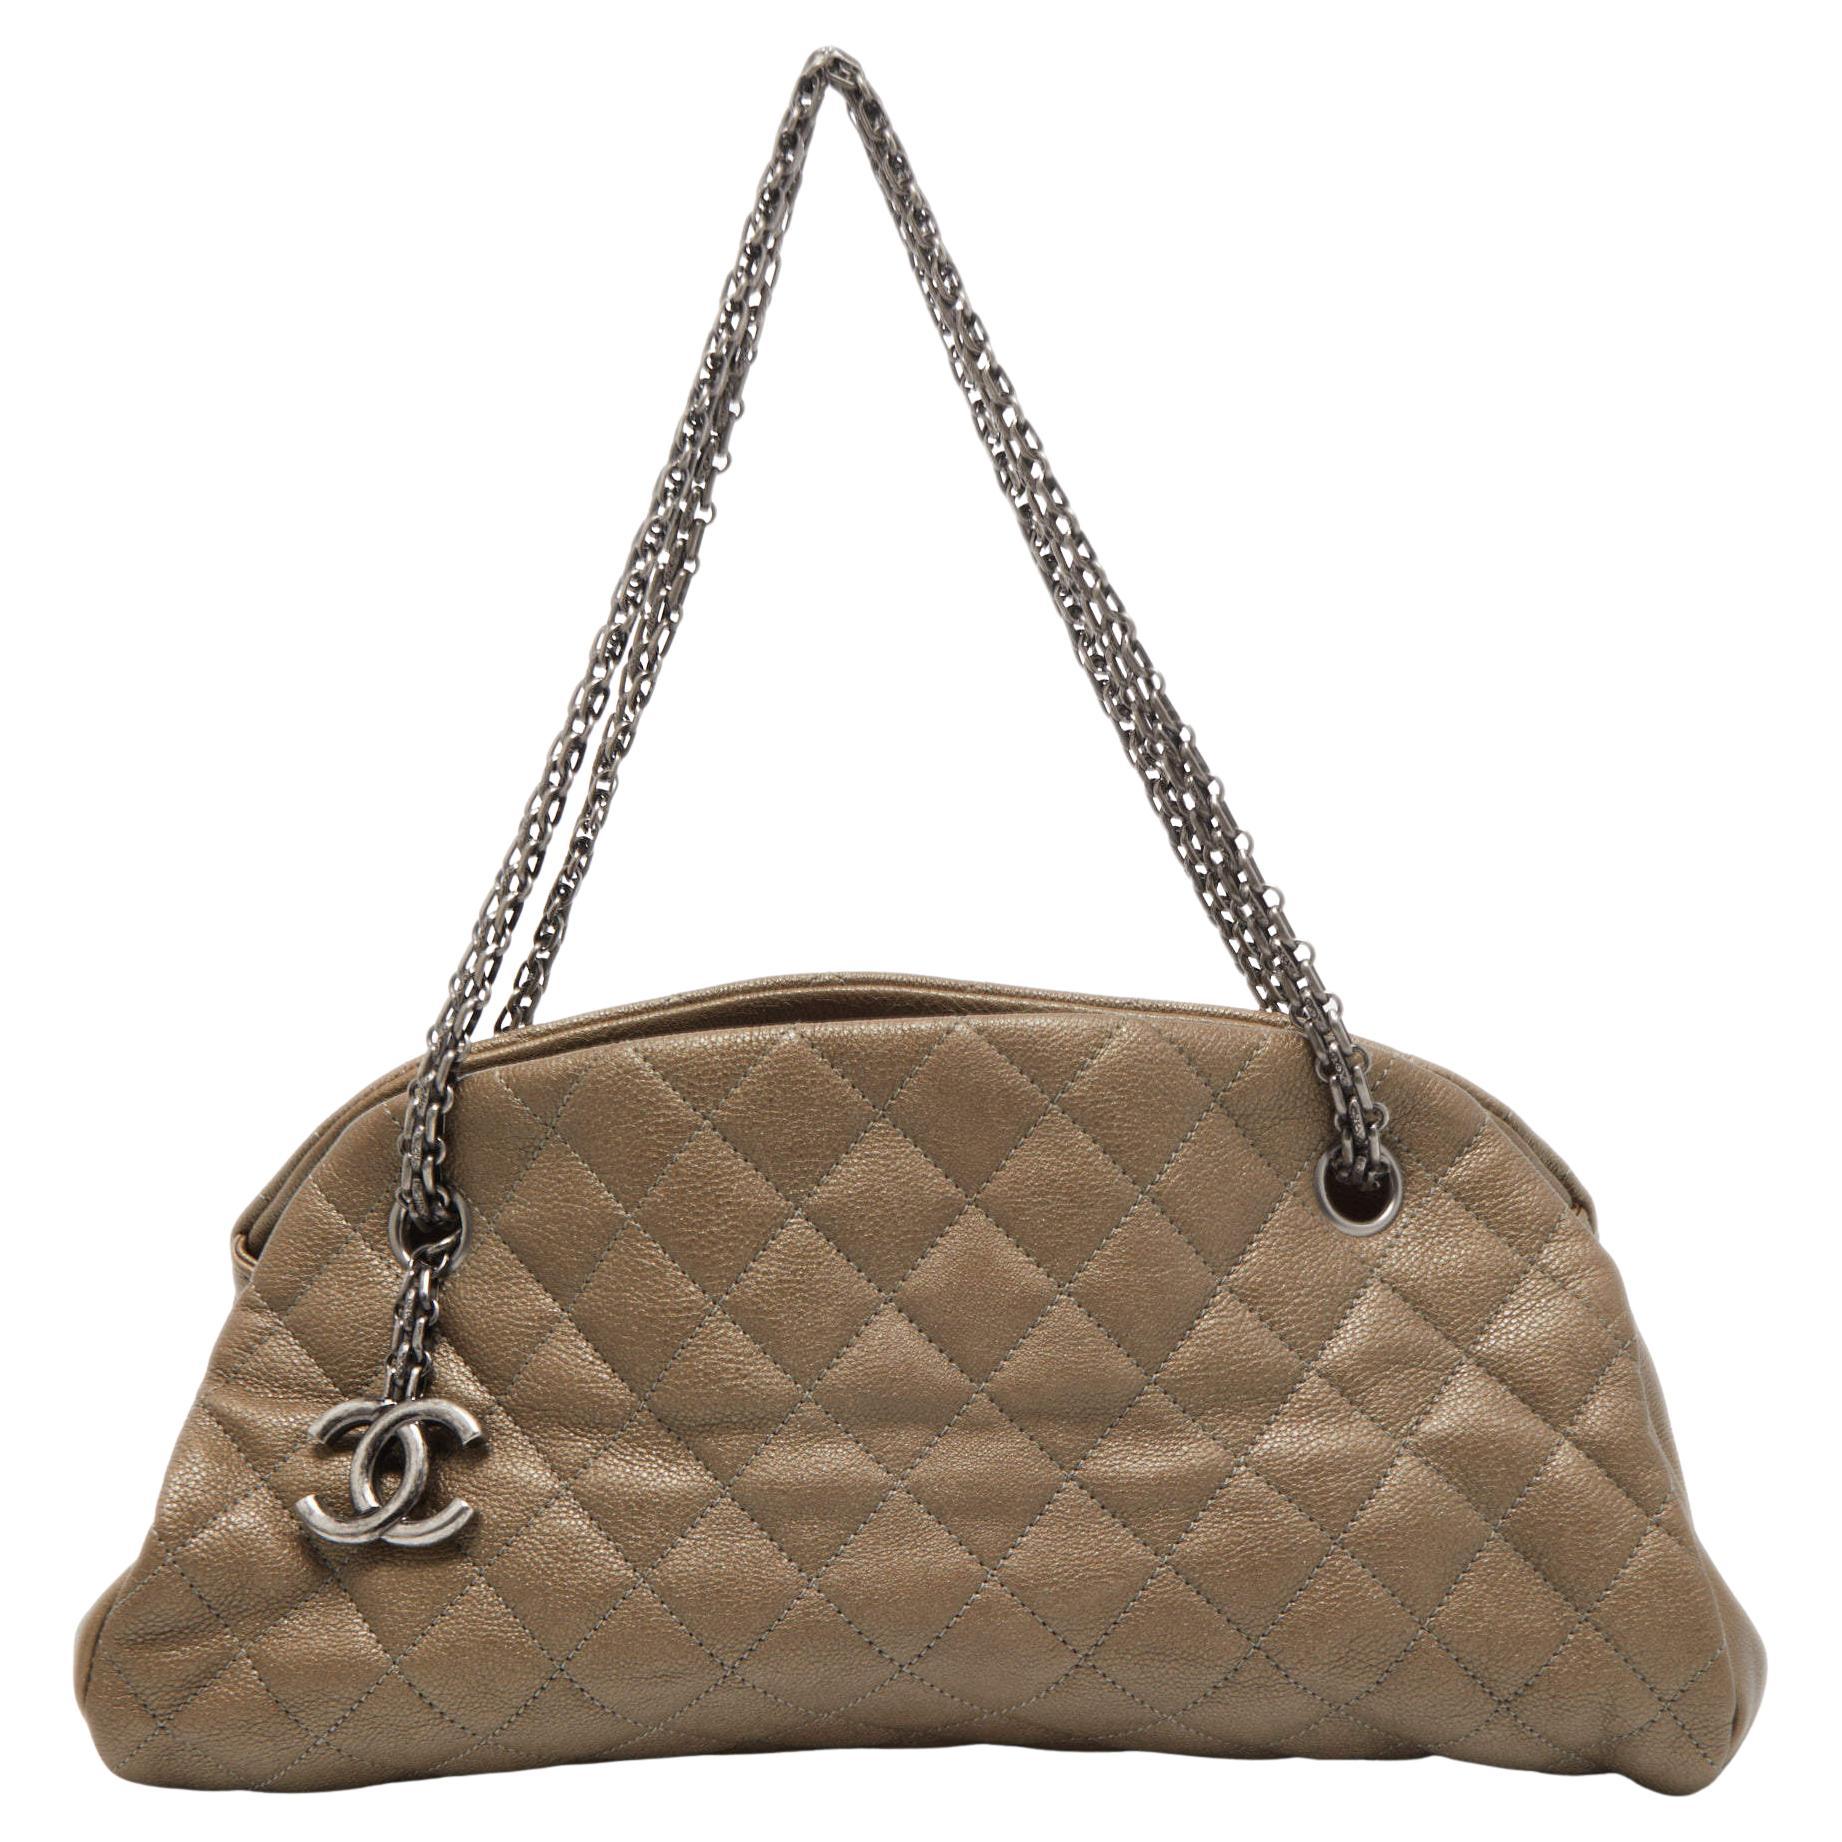 Chanel Olive Green Quilted Caviar Leather Medium Just